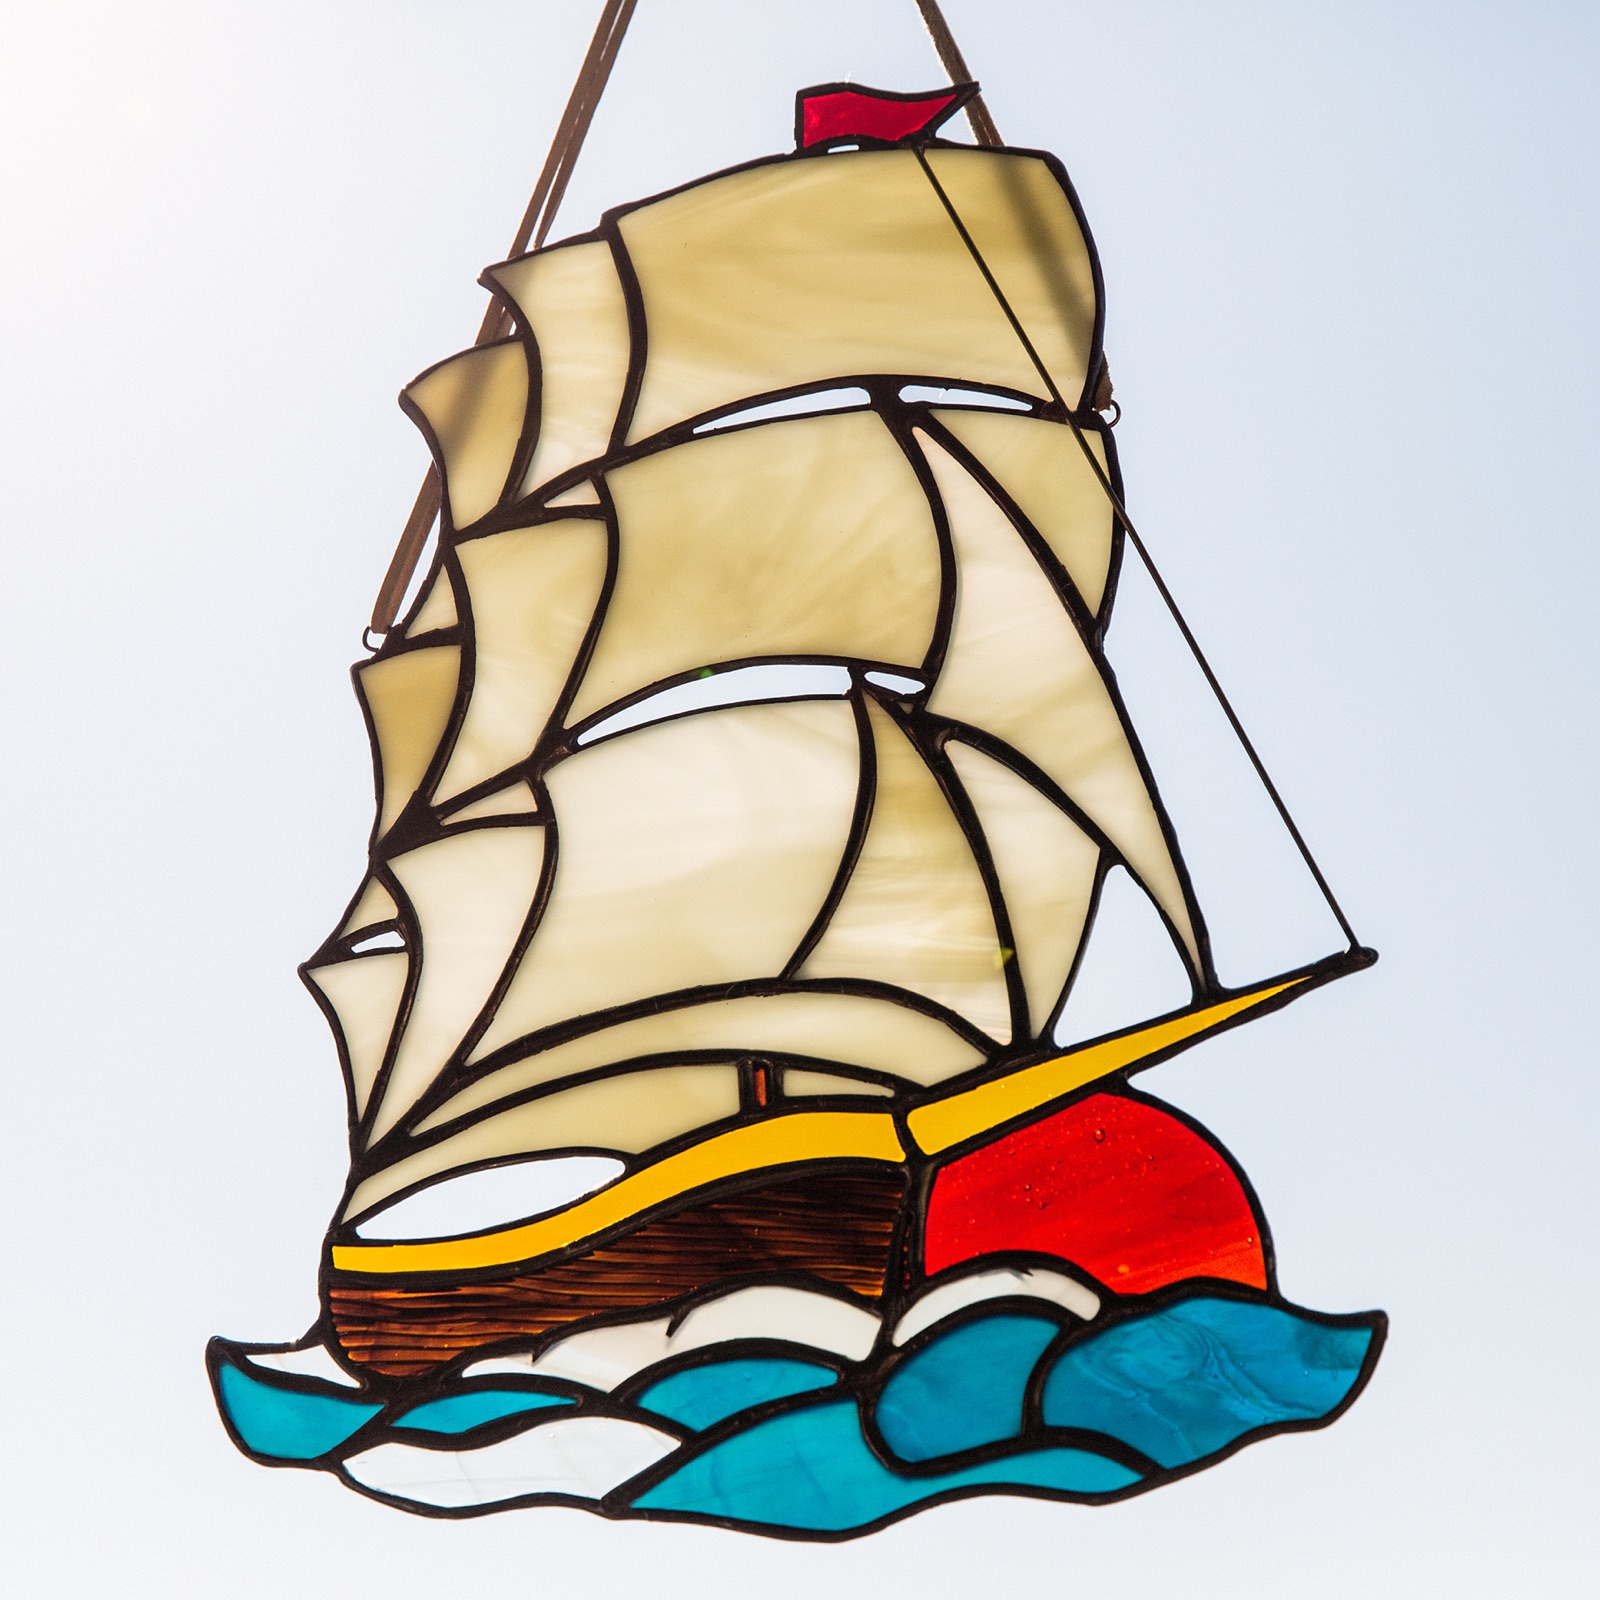 Sailor Jerry inspired ship for a nursery